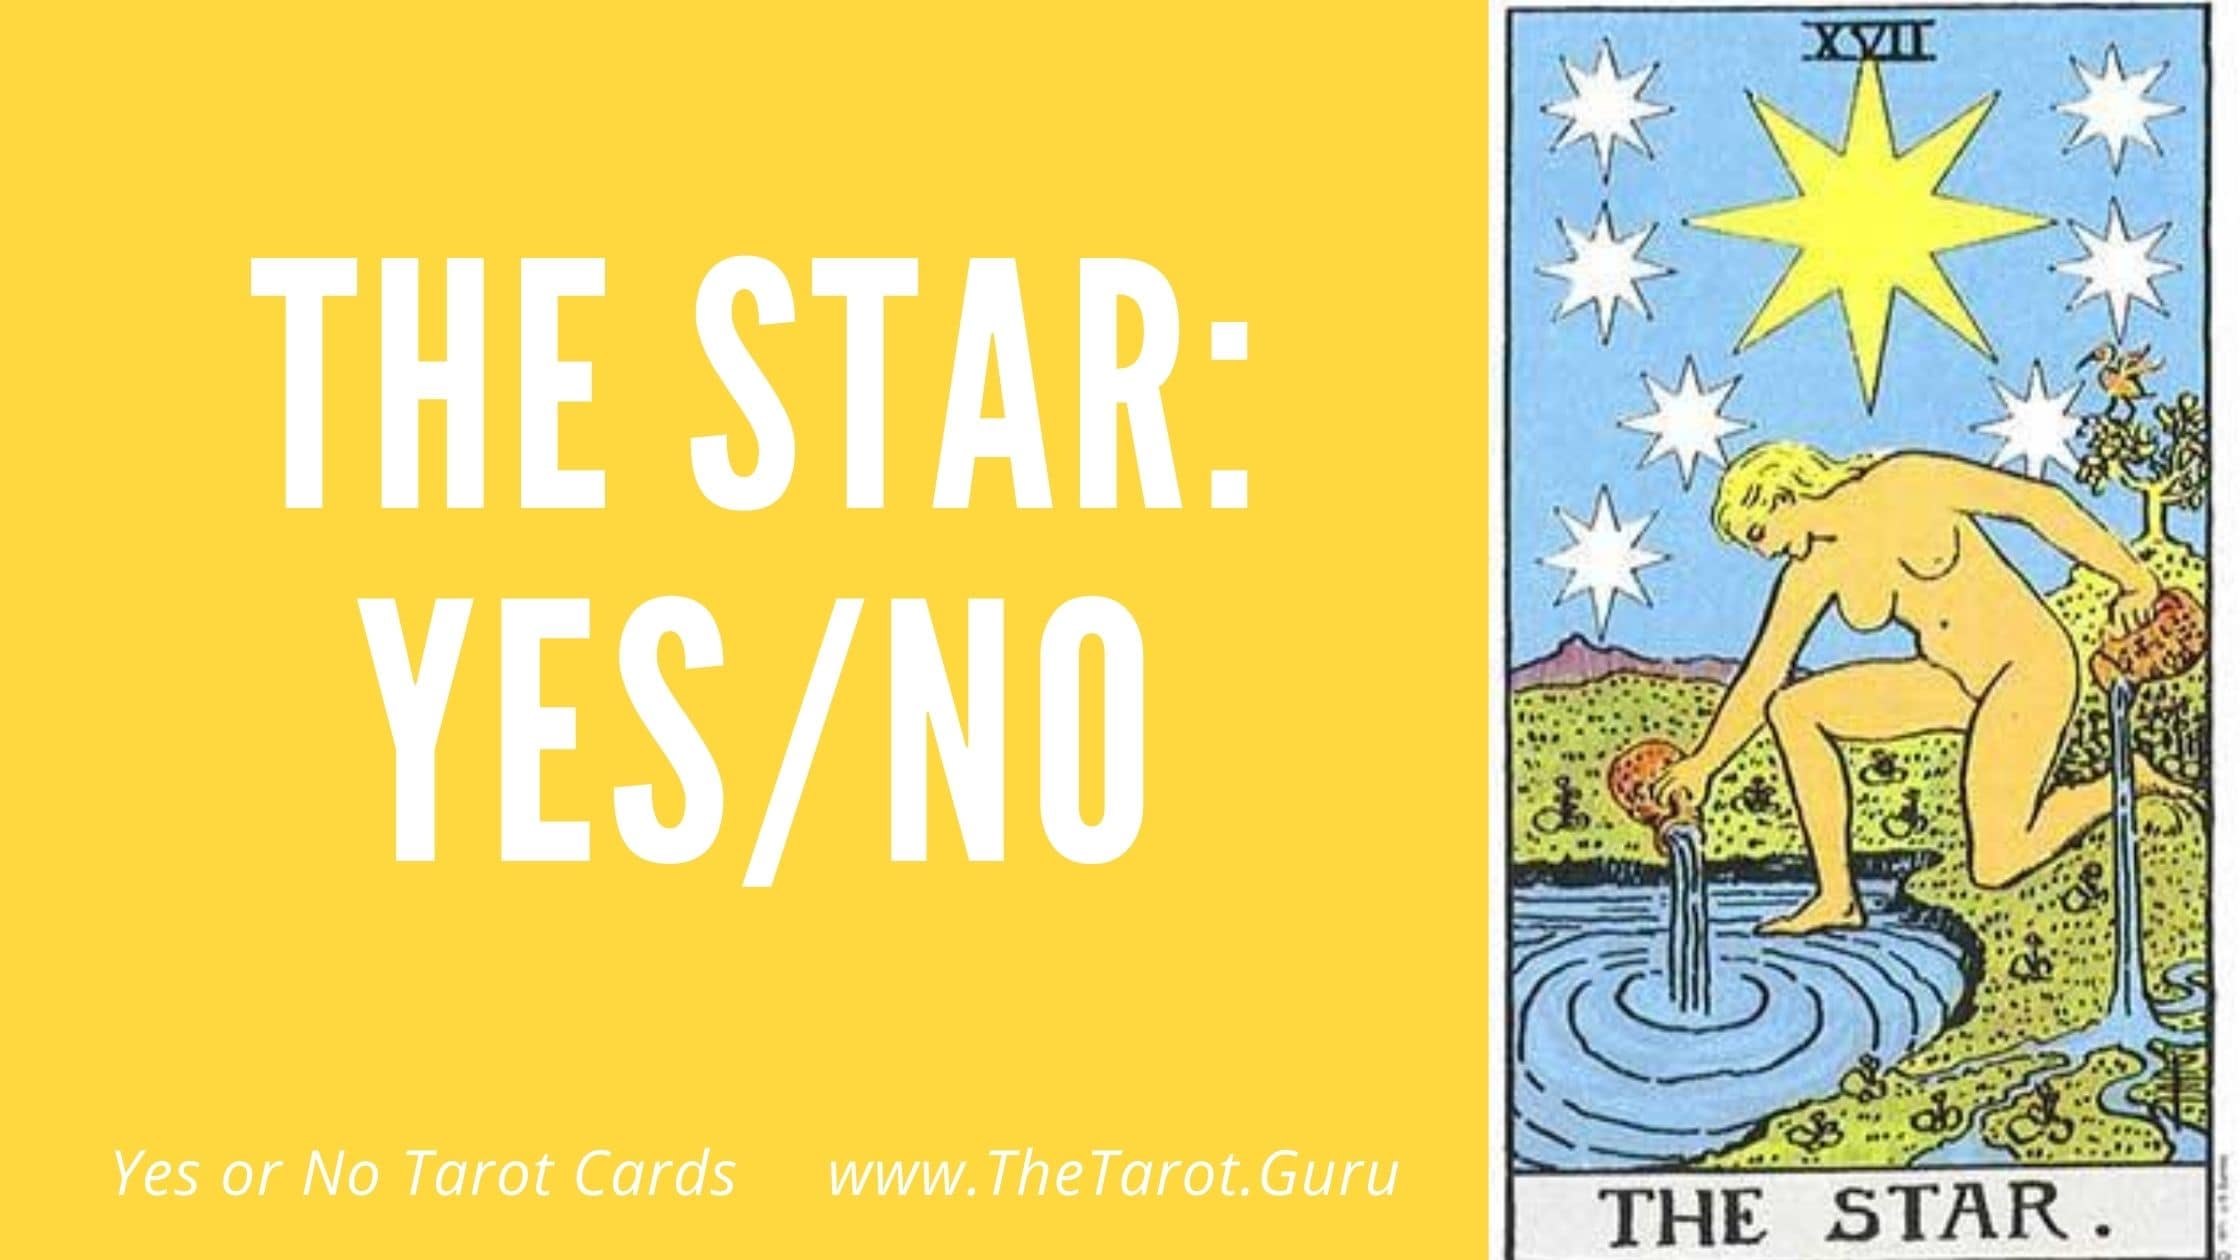 The Star Yes or No Tarot